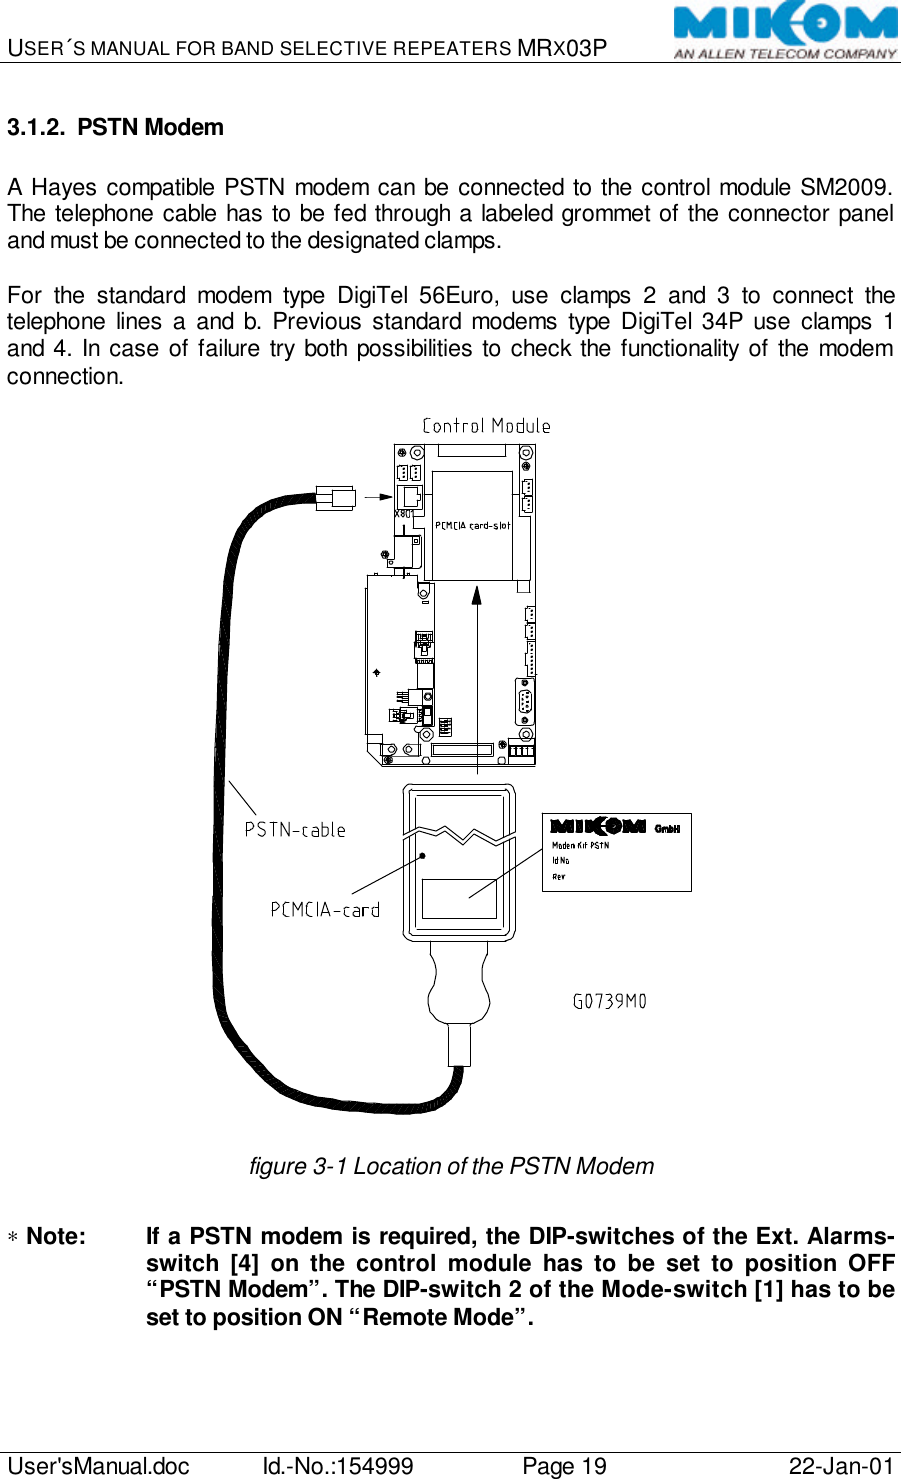 USER´S MANUAL FOR BAND SELECTIVE REPEATERS MRX03P   User&apos;sManual.doc Id.-No.:154999 Page 19 22-Jan-01  3.1.2. PSTN Modem  A Hayes compatible PSTN modem can be connected to the control module SM2009. The telephone cable has to be fed through a labeled grommet of the connector panel and must be connected to the designated clamps.  For the standard modem type DigiTel 56Euro, use clamps 2 and 3 to connect the telephone lines a and b. Previous standard modems type DigiTel 34P use clamps 1 and 4. In case of failure try both possibilities to check the functionality of the modem connection.    figure 3-1 Location of the PSTN Modem  ∗ Note: If a PSTN modem is required, the DIP-switches of the Ext. Alarms-switch [4] on the control module has to be set to position OFF “PSTN Modem”. The DIP-switch 2 of the Mode-switch [1] has to be set to position ON “Remote Mode”.   